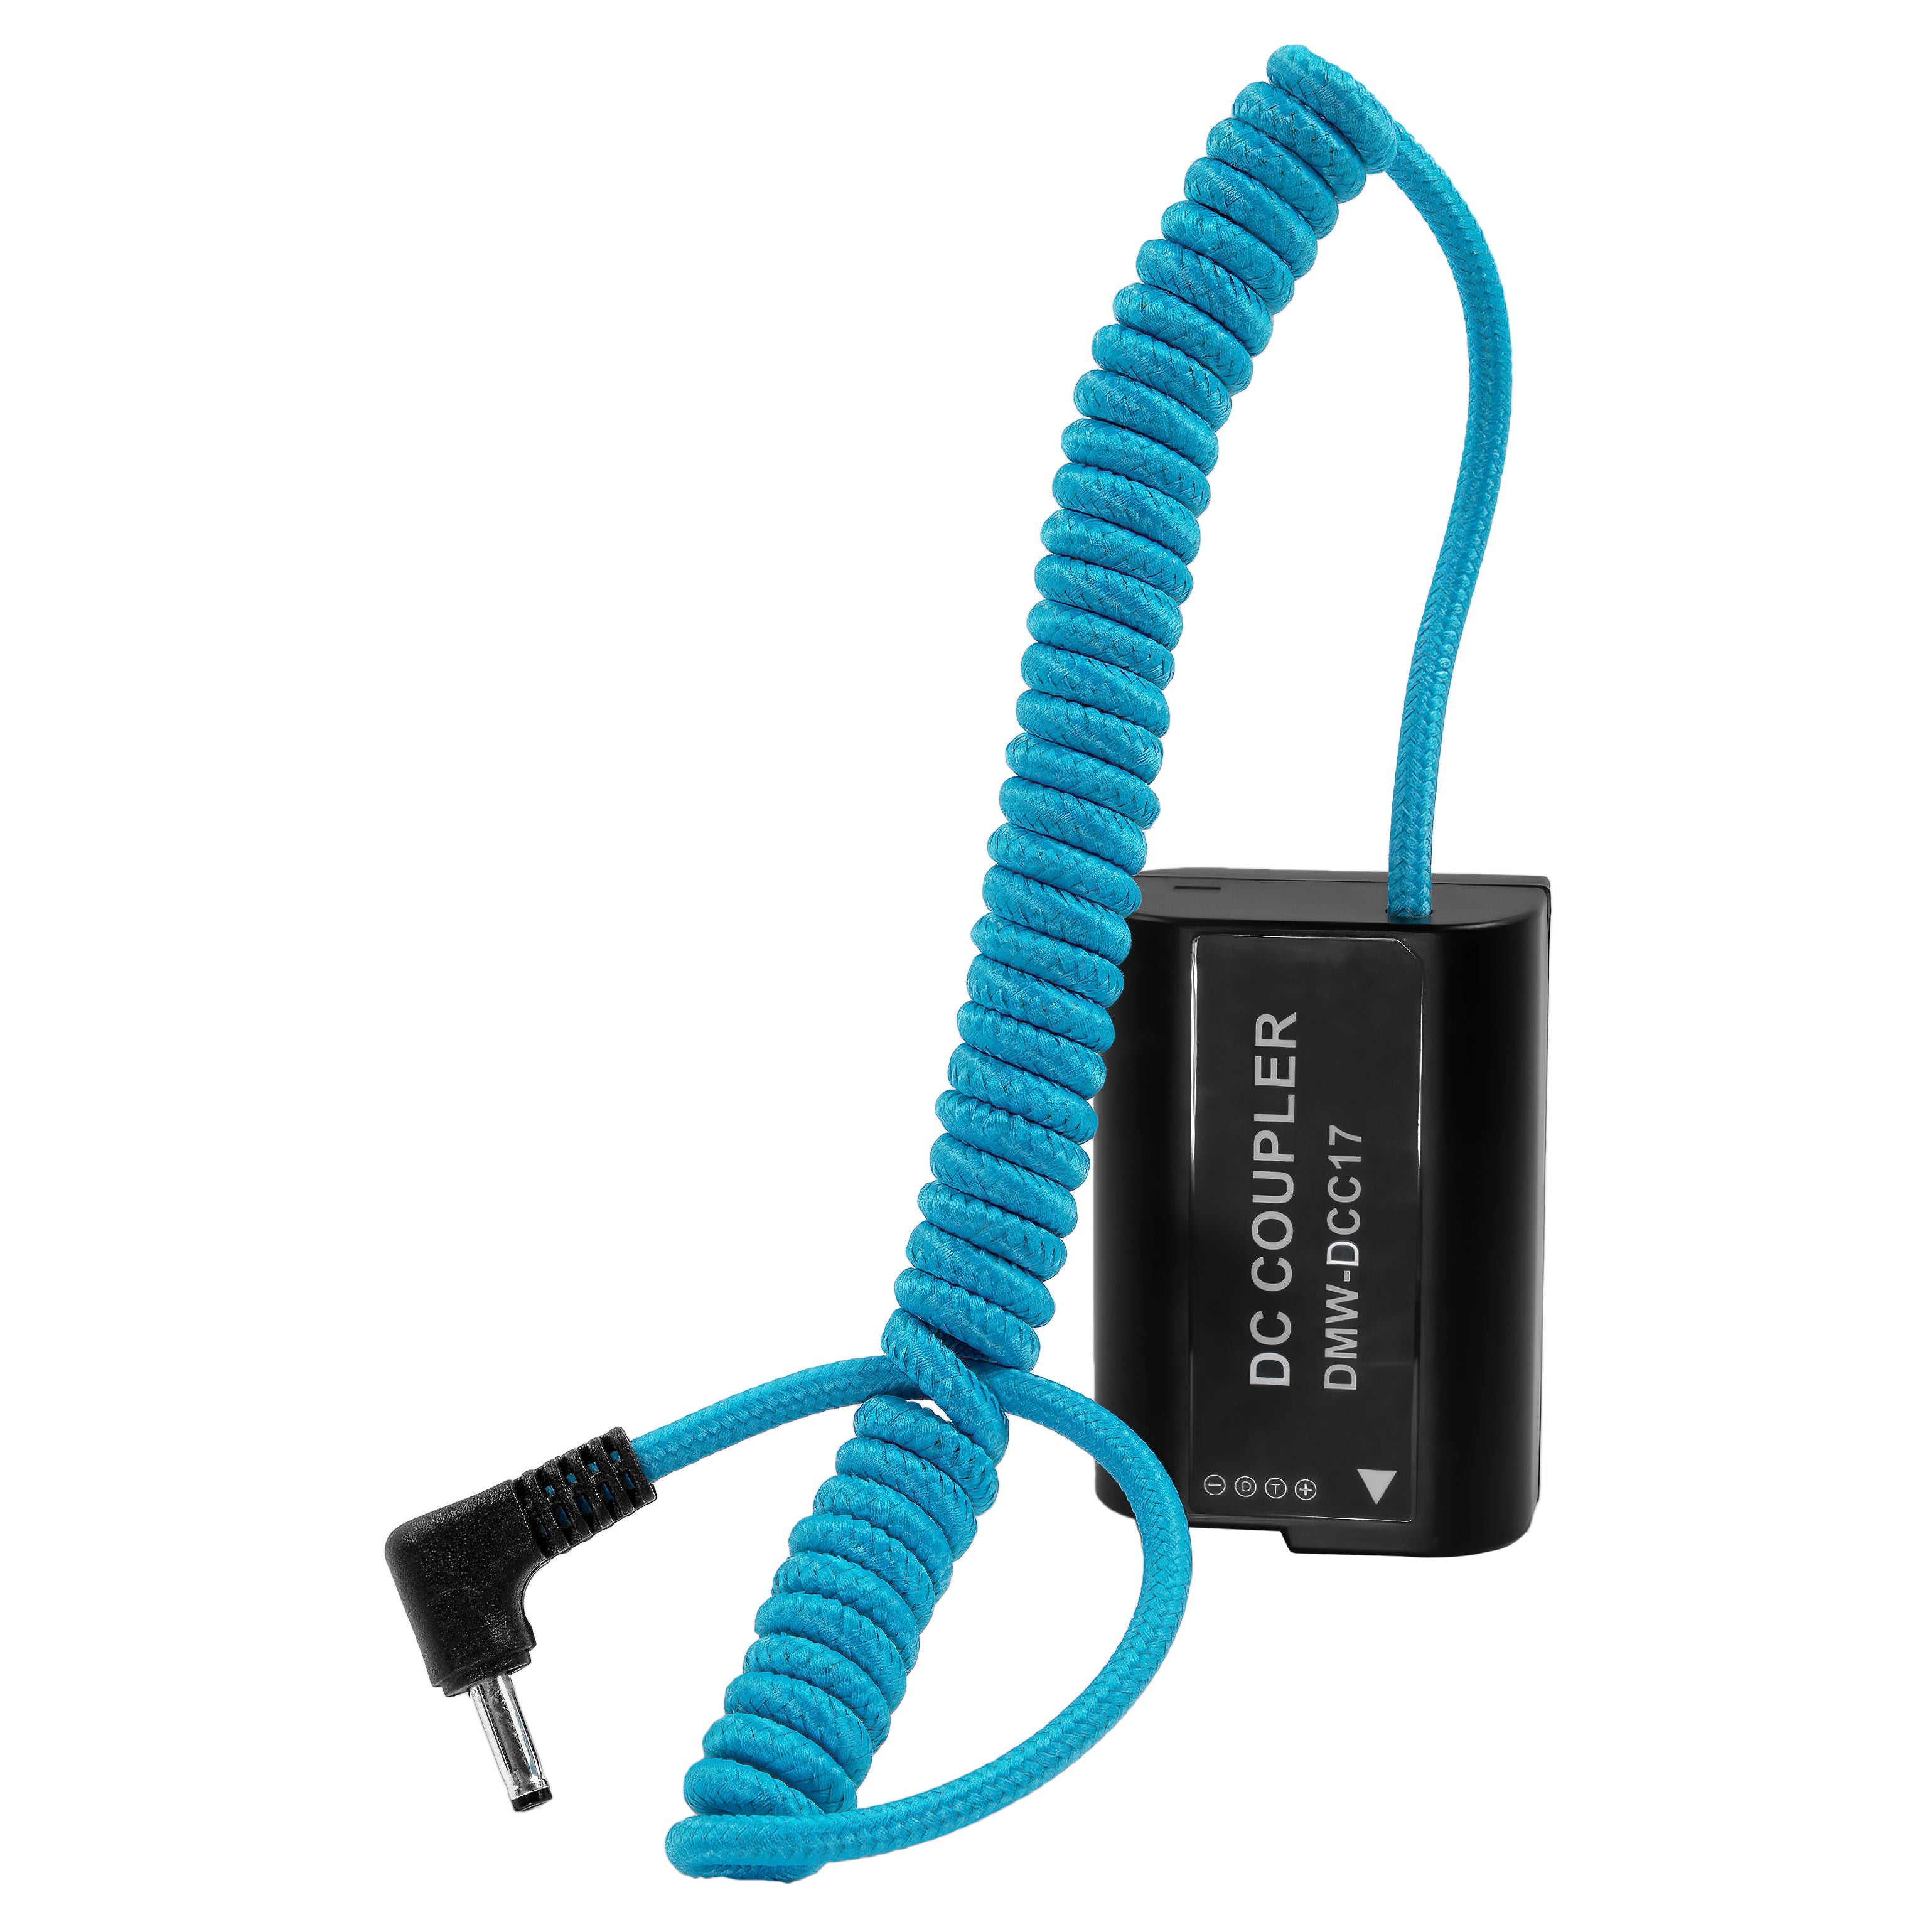 Hawk-Woods Dummy Battery Adapter Cable for Panasonic Lumix LR-14